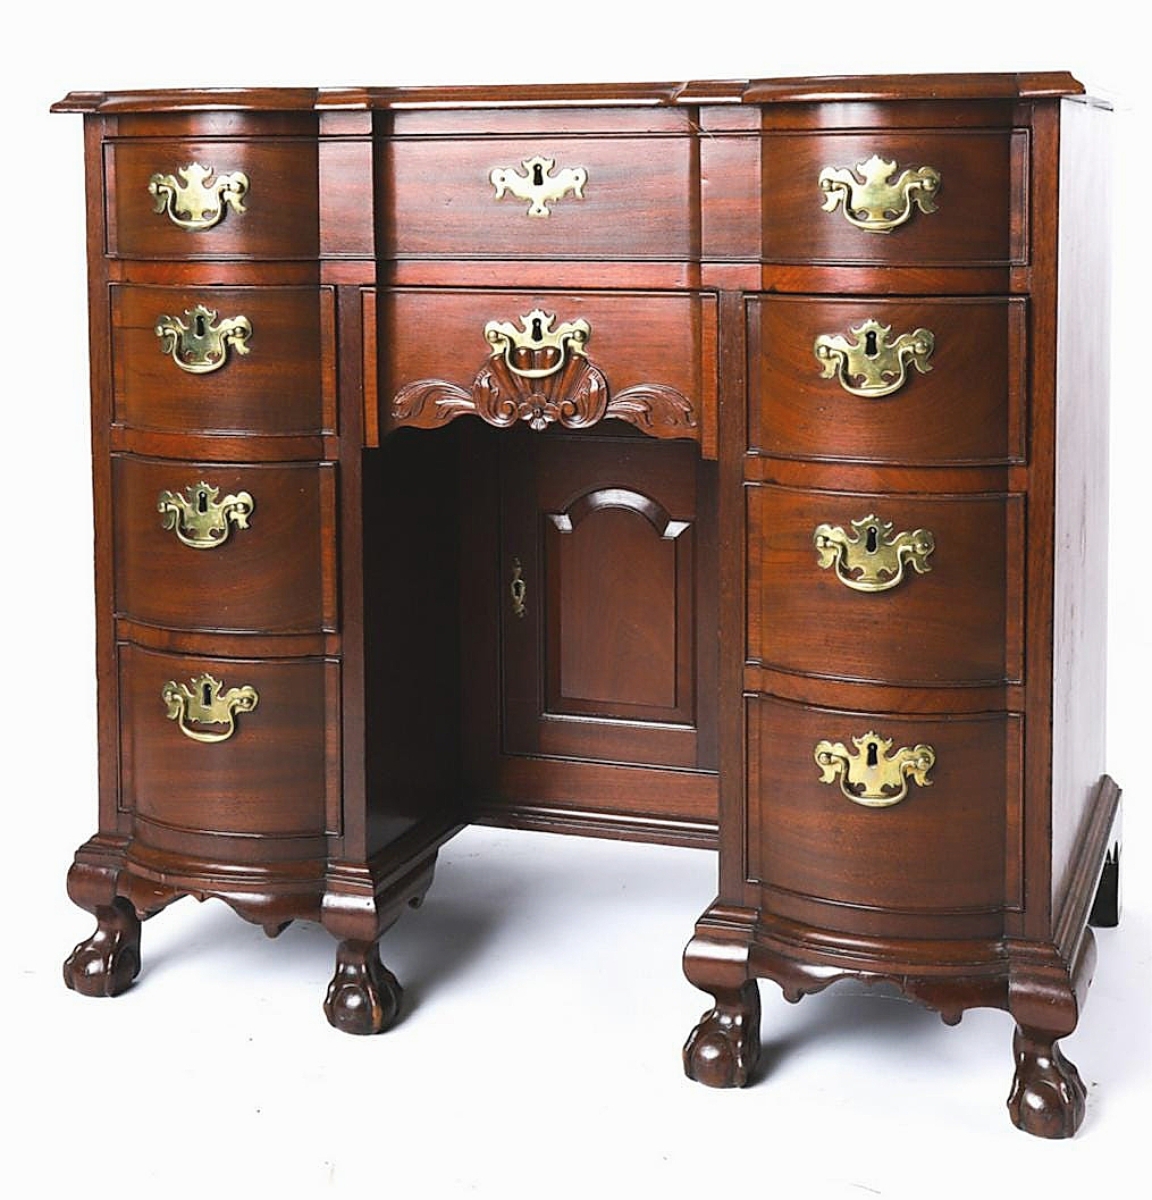 The highest priced piece of furniture in the sale, $22,800, was achieved by a small New York mahogany Chippendale blockfront kneehole desk. It had been discussed in the 2016 edition of Chipstone’s American Furniture.